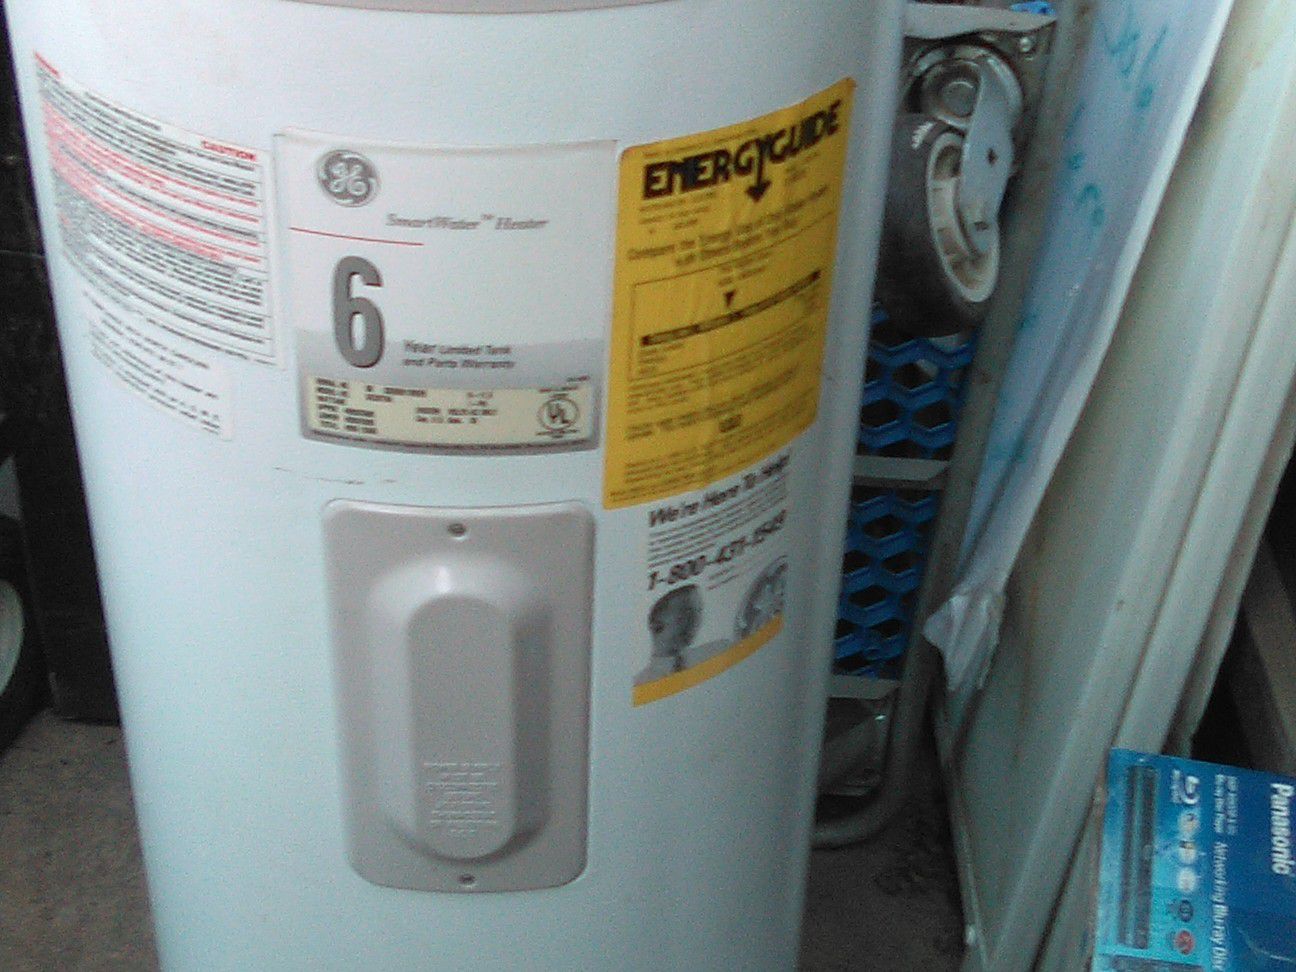 A GE hot water heater electric